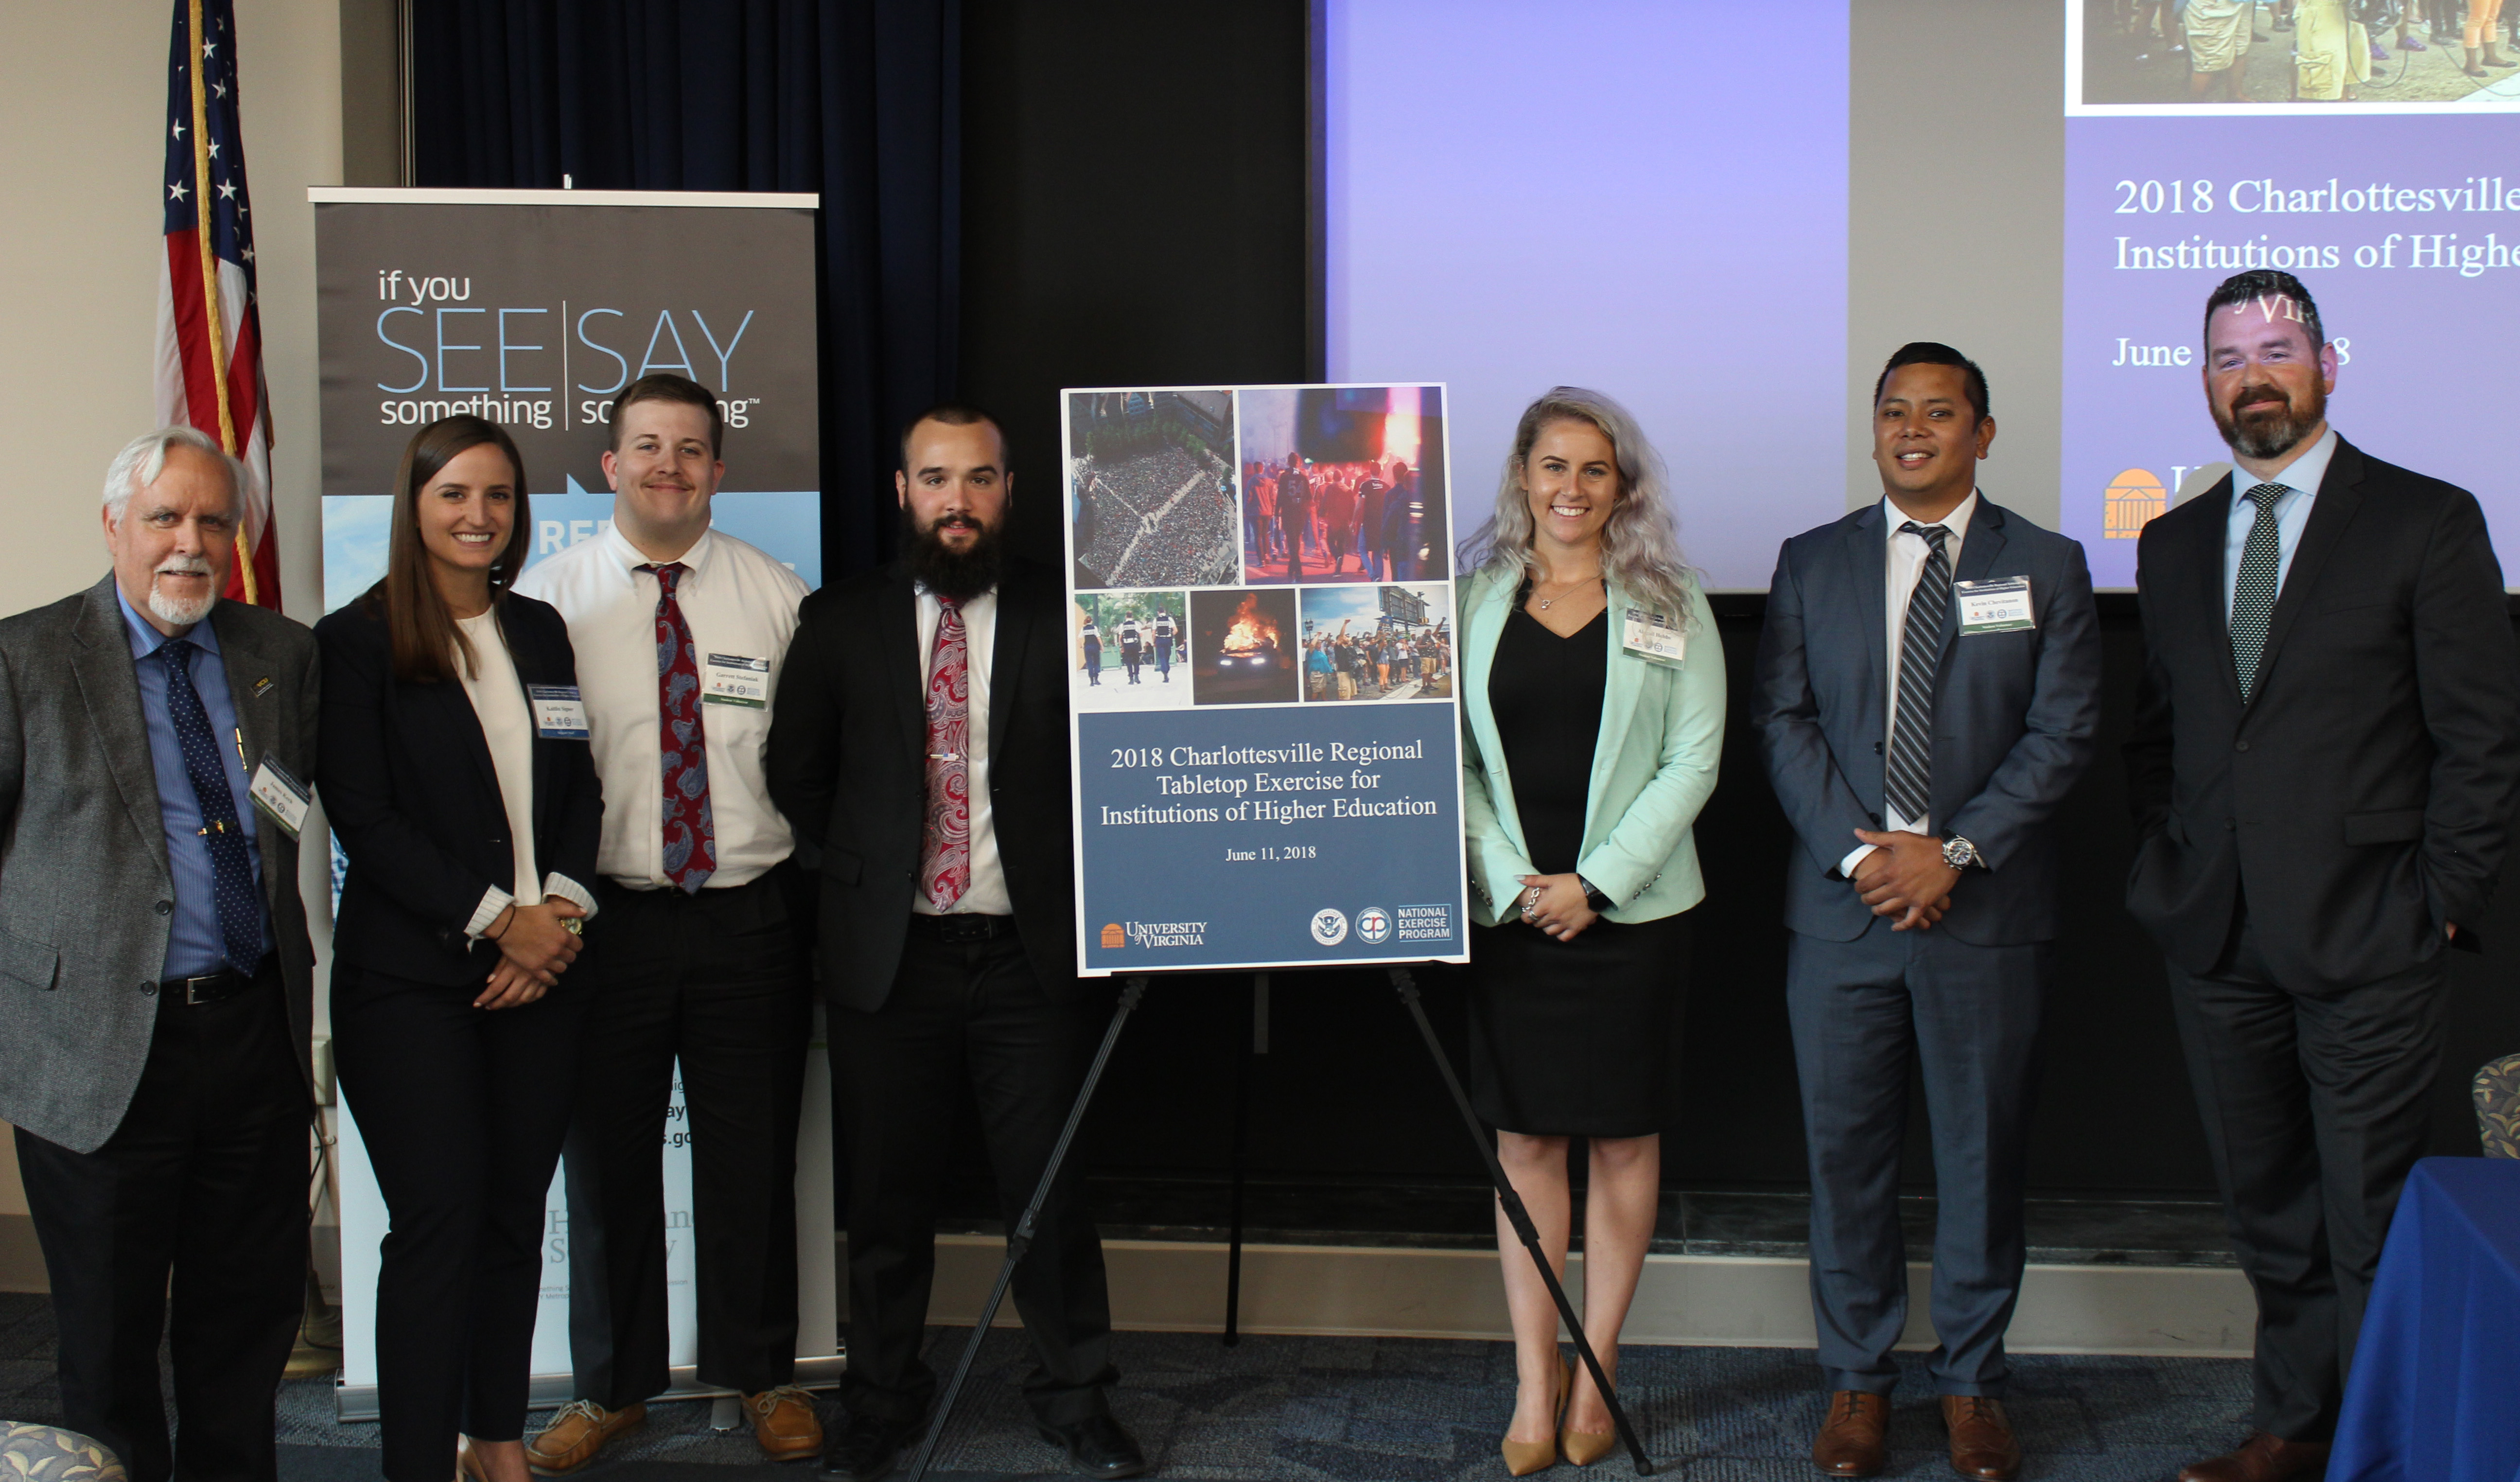 The Wilder School group and colleagues from the U.S. Department of Homeland Security's Office of Academic Engagement gather during the conference. From left are Associate Professor James Keck; Kaitlin Signor of the DHS; students Garrett Stefaniak, Nathan Moorhead, Abigail Hobbs, Kevin Chevitanon; and Trent Frazier of the DHS.